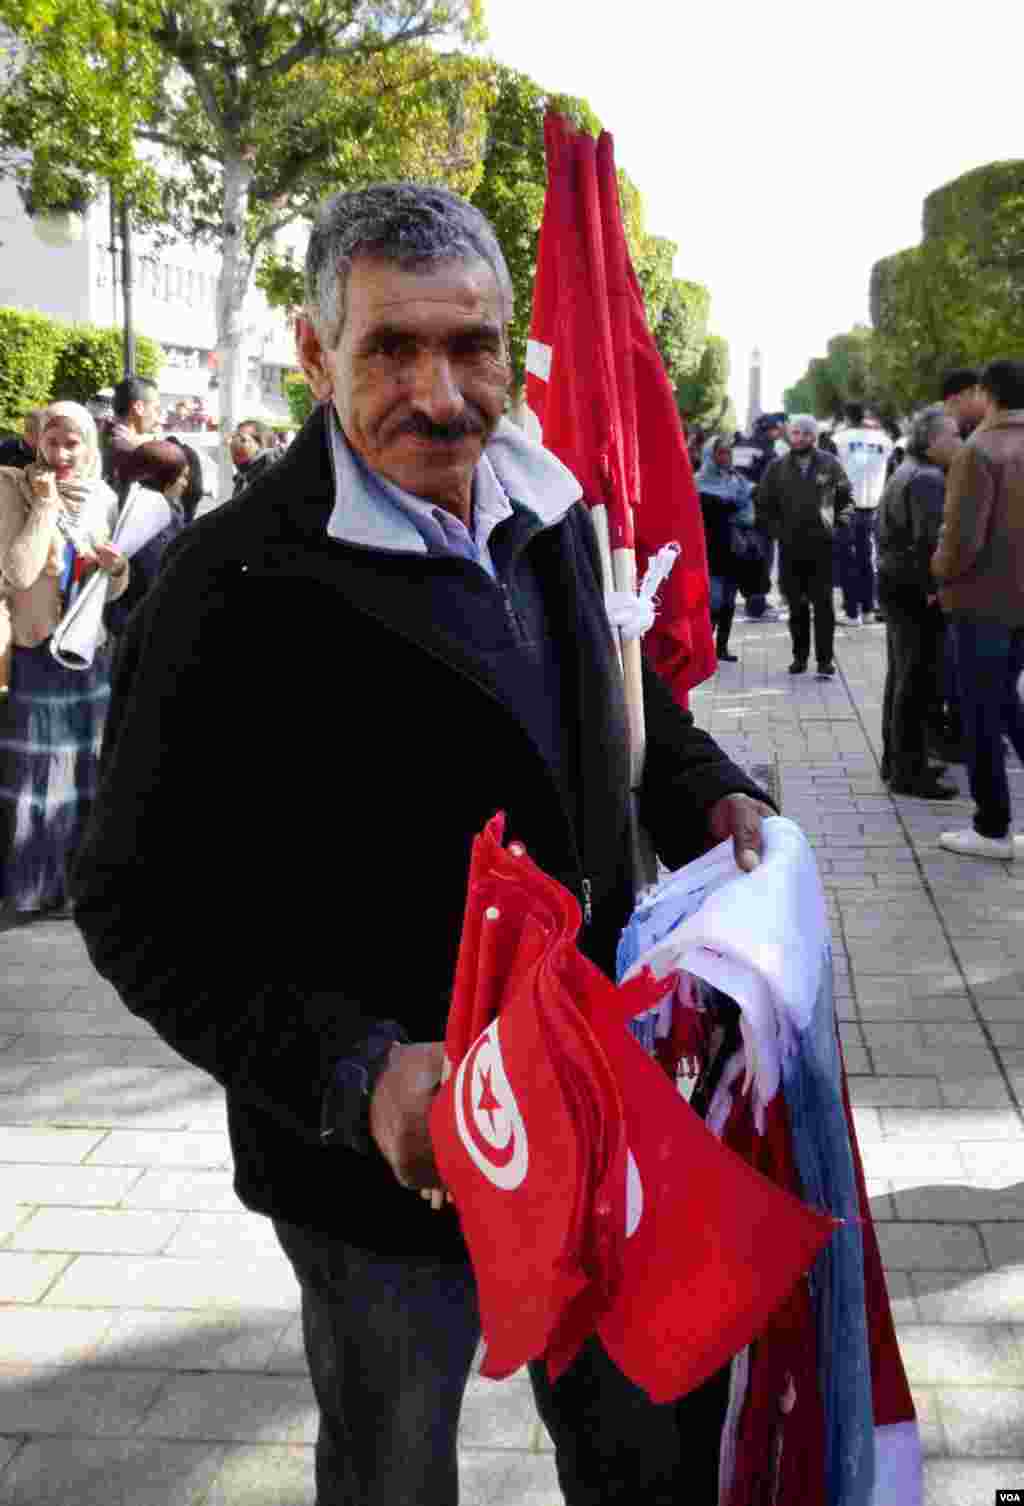 An Ennahda supporter selling flags in Tunis. (Henry Ridgewell for VOA)